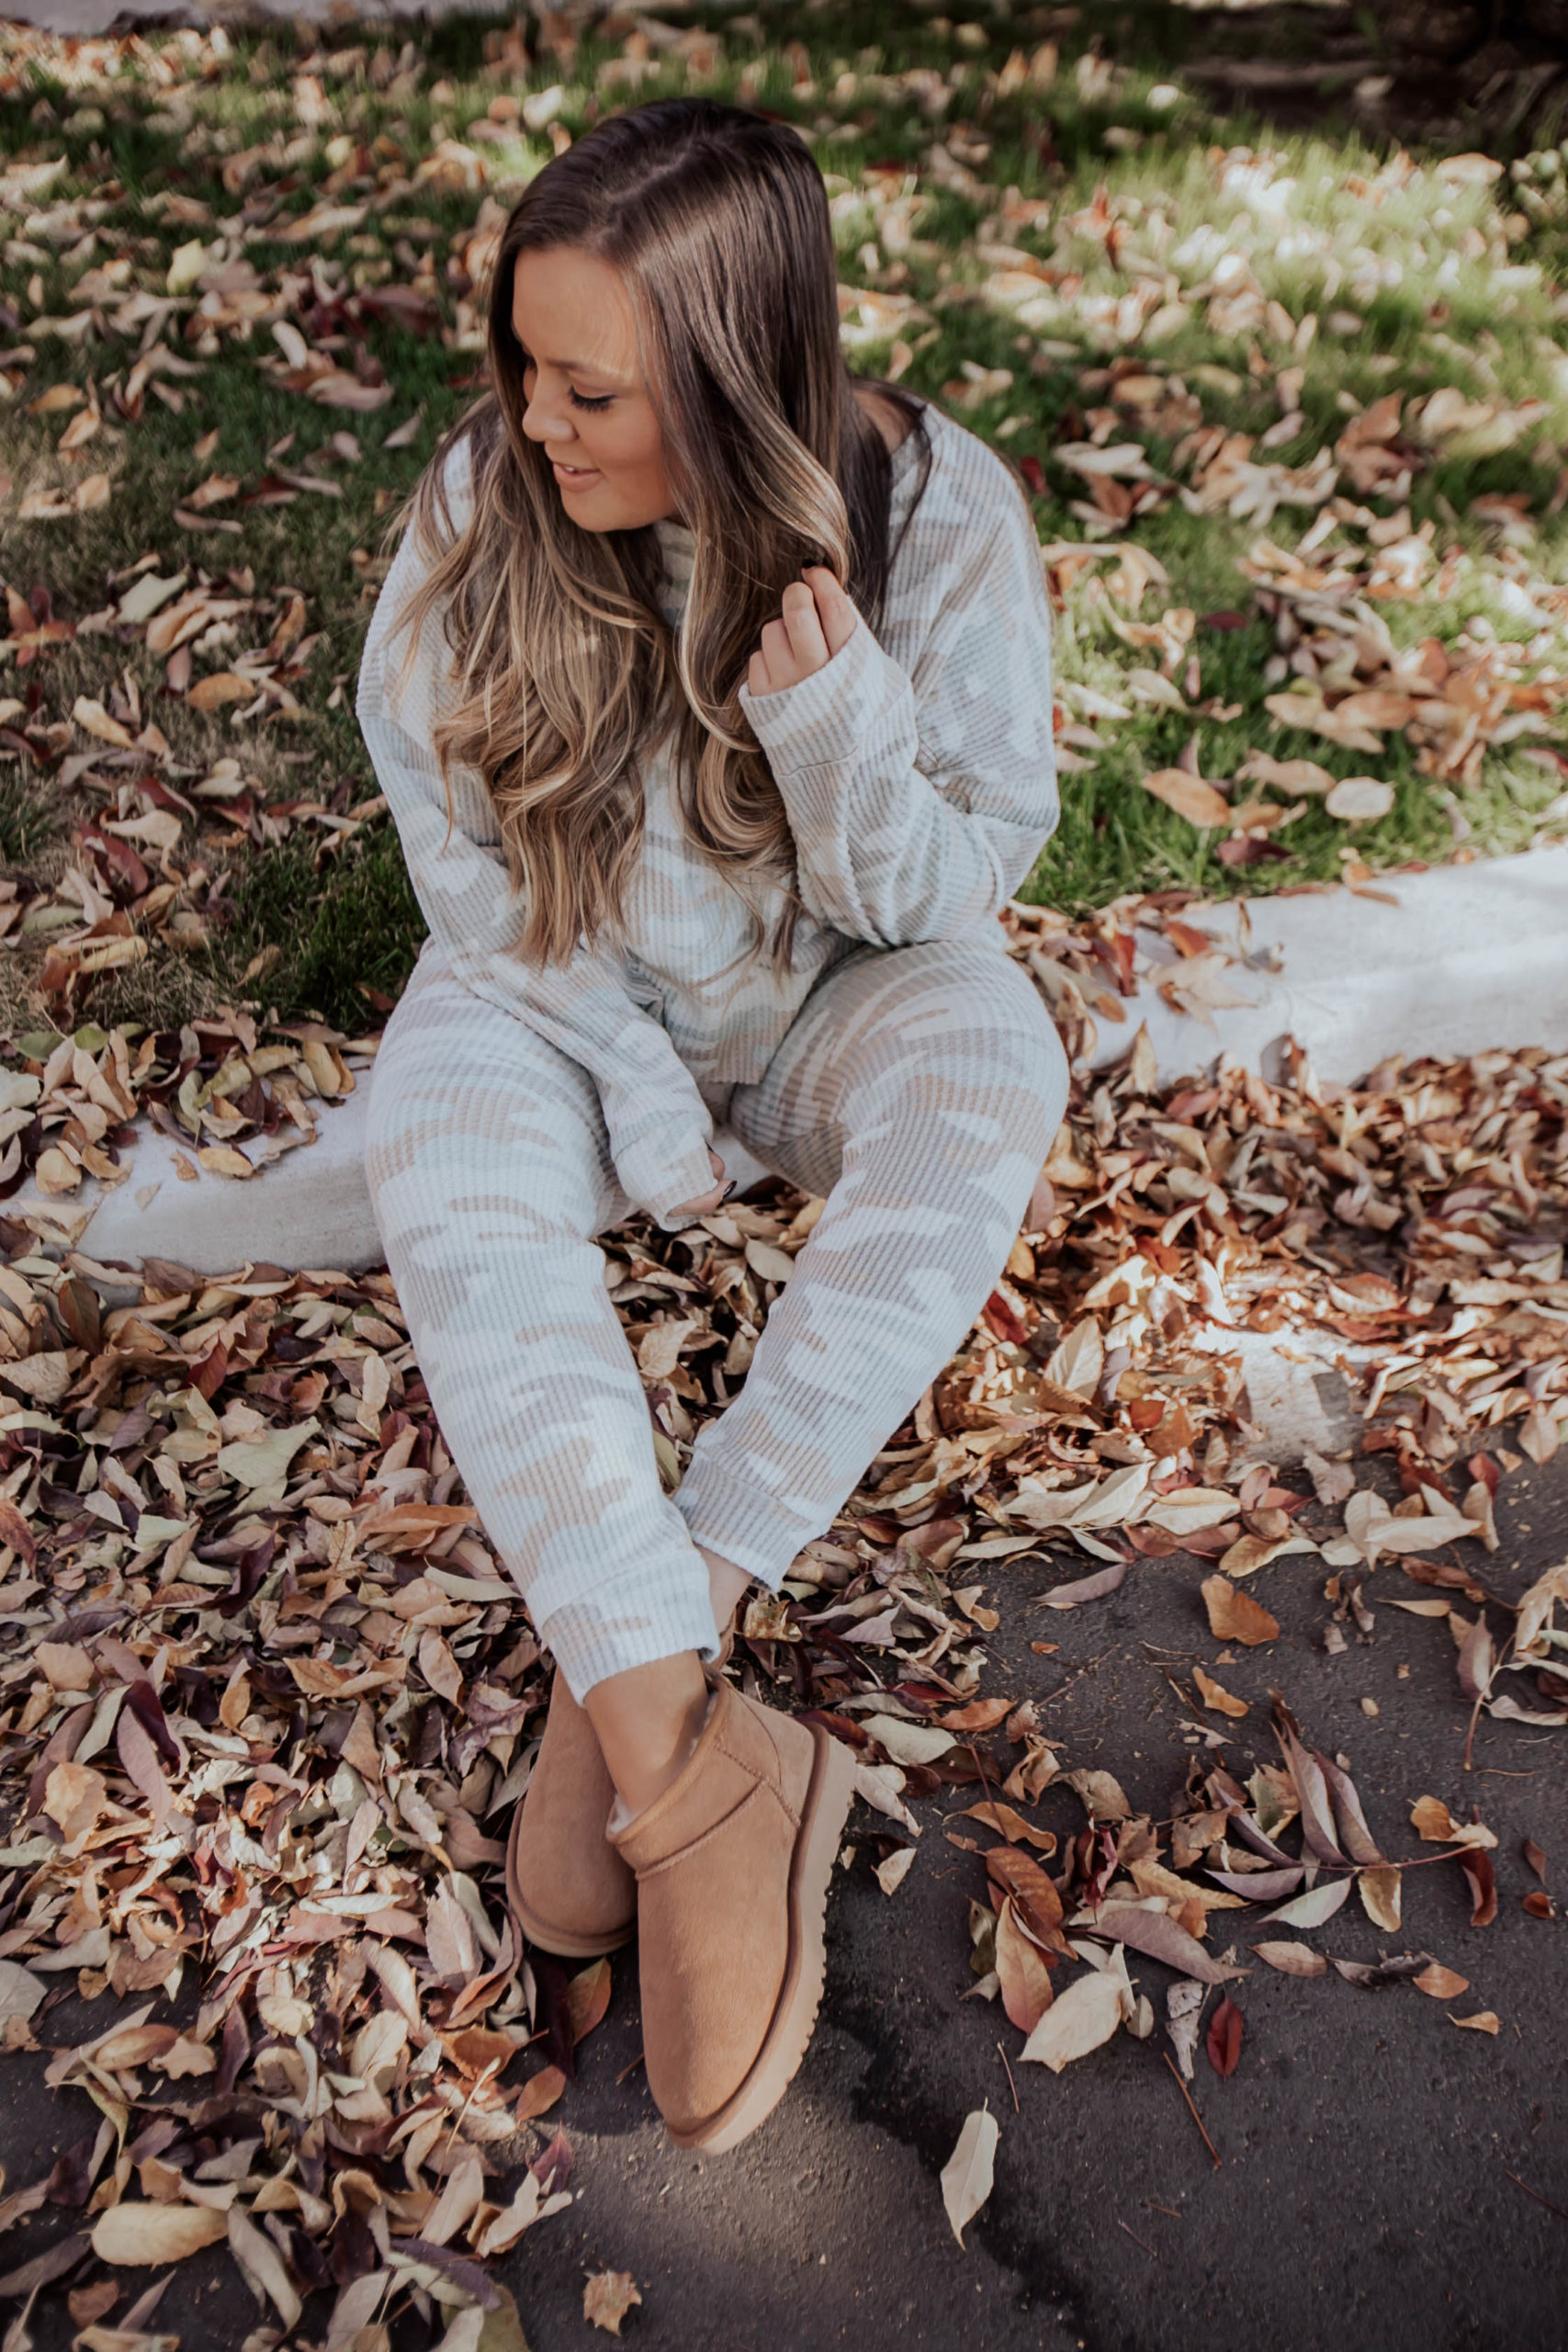 Reno bloggers, Ashley Zeal Hurd and Emily Wieczorek share their favorite Ugg styles. These would make the perfect holiday gifts!